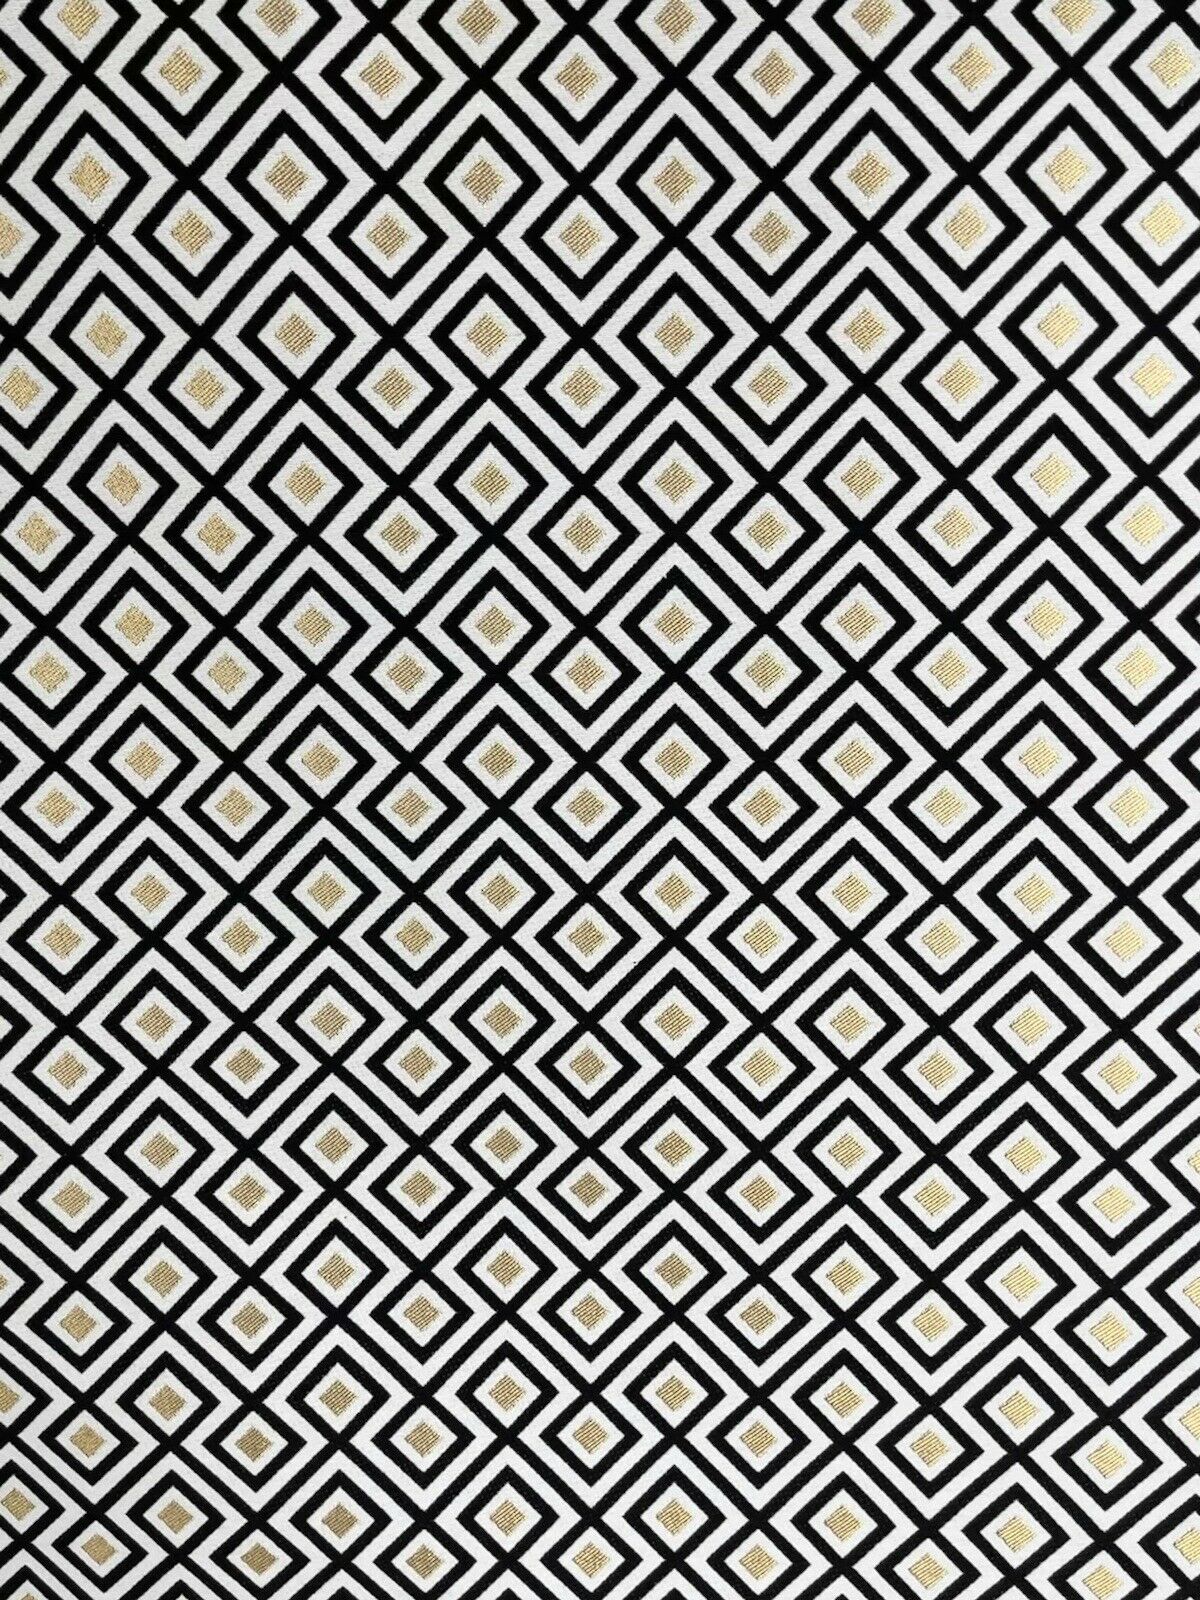 Art Deco Blocks Woven Fabric by Meter Gold Upholstery Textile Black White Sewing Material